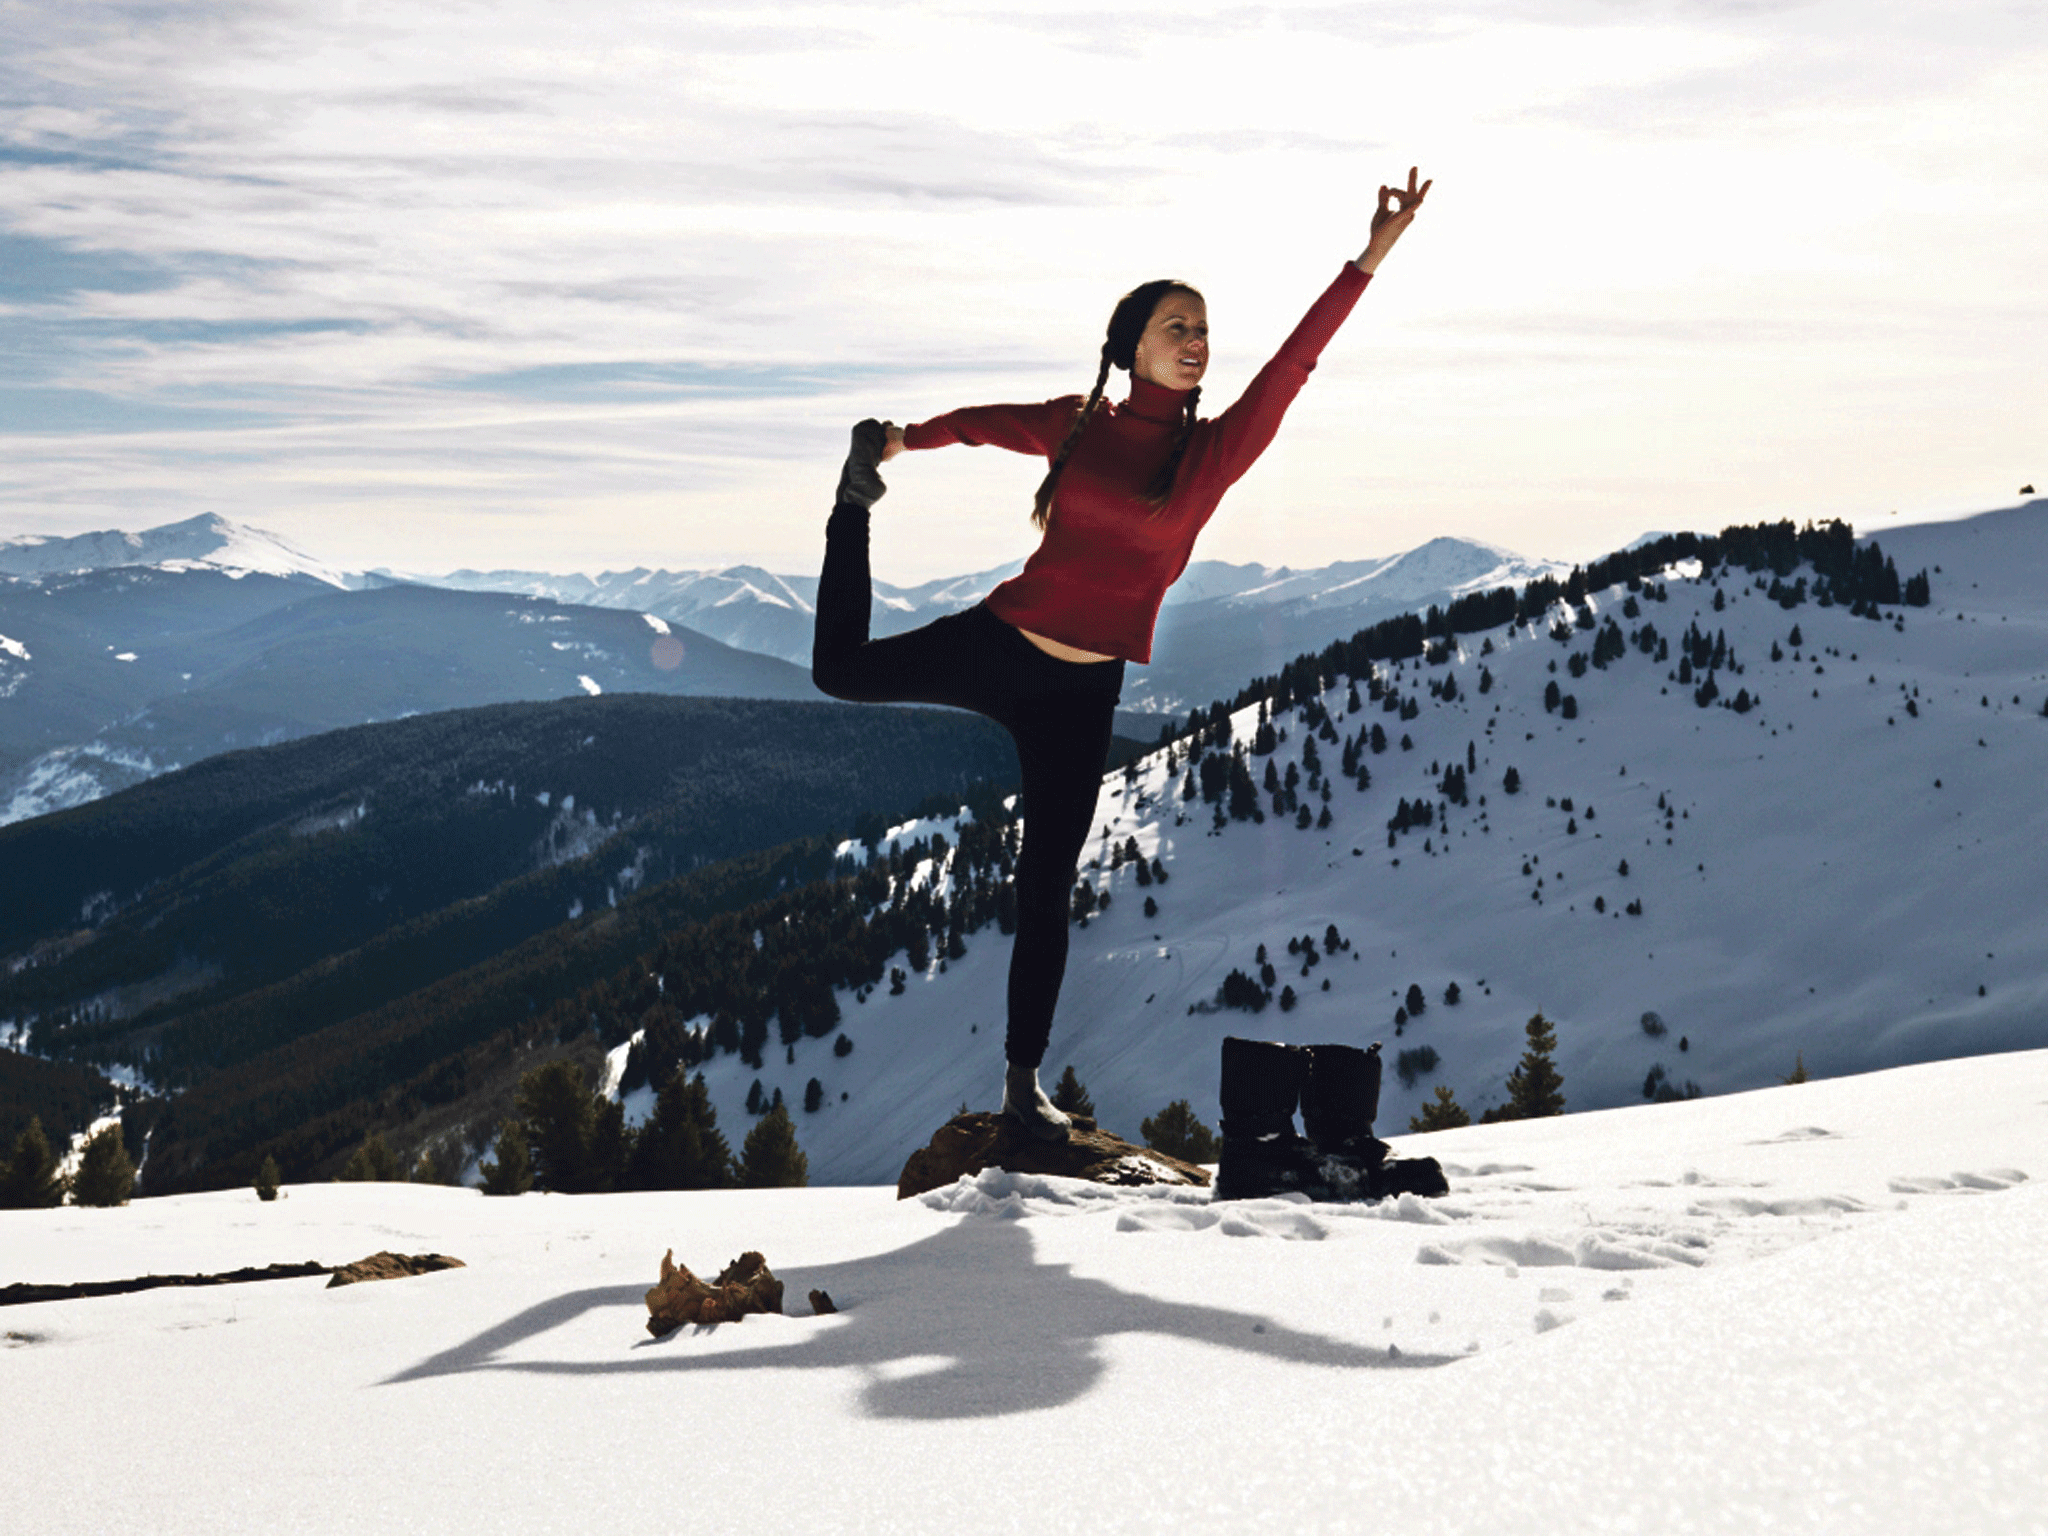 Reach out: yoga eases ski-weary limbs